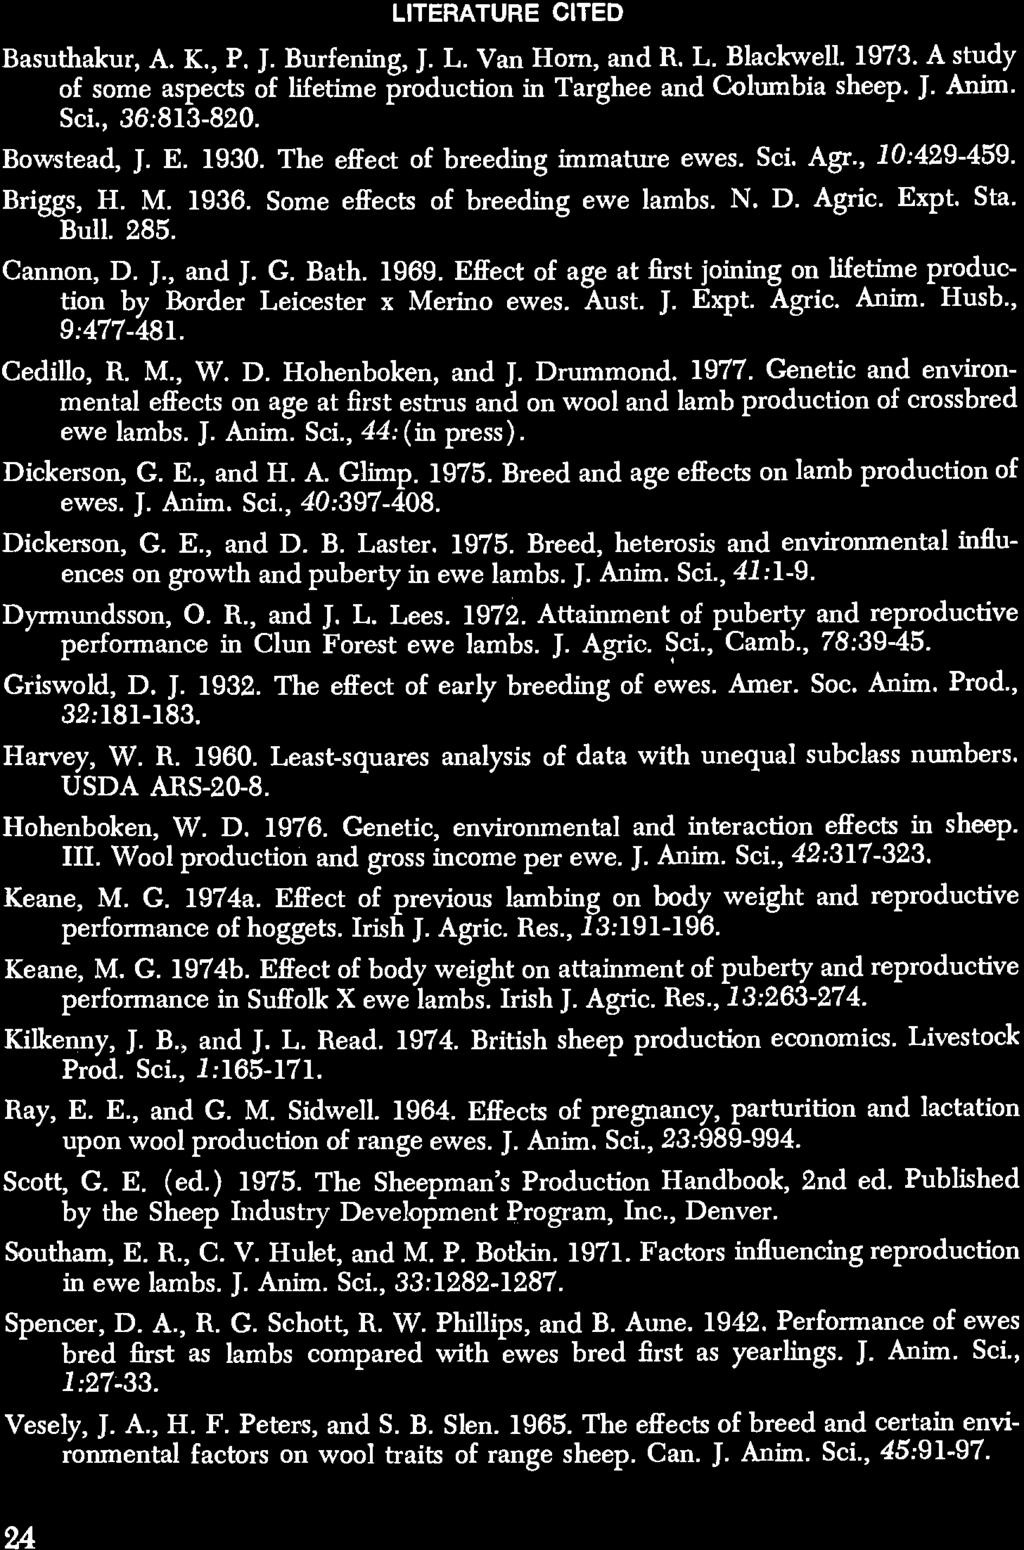 LITERATURE CITED Basuthakur, A. K., P. J. Burfening, J. L. Van Horn, and R. L. Blackwell. 1973. A study of some aspects of lifetime production in Targhee and Columbia sheep. J. Anim. Sci., 36:813-820.